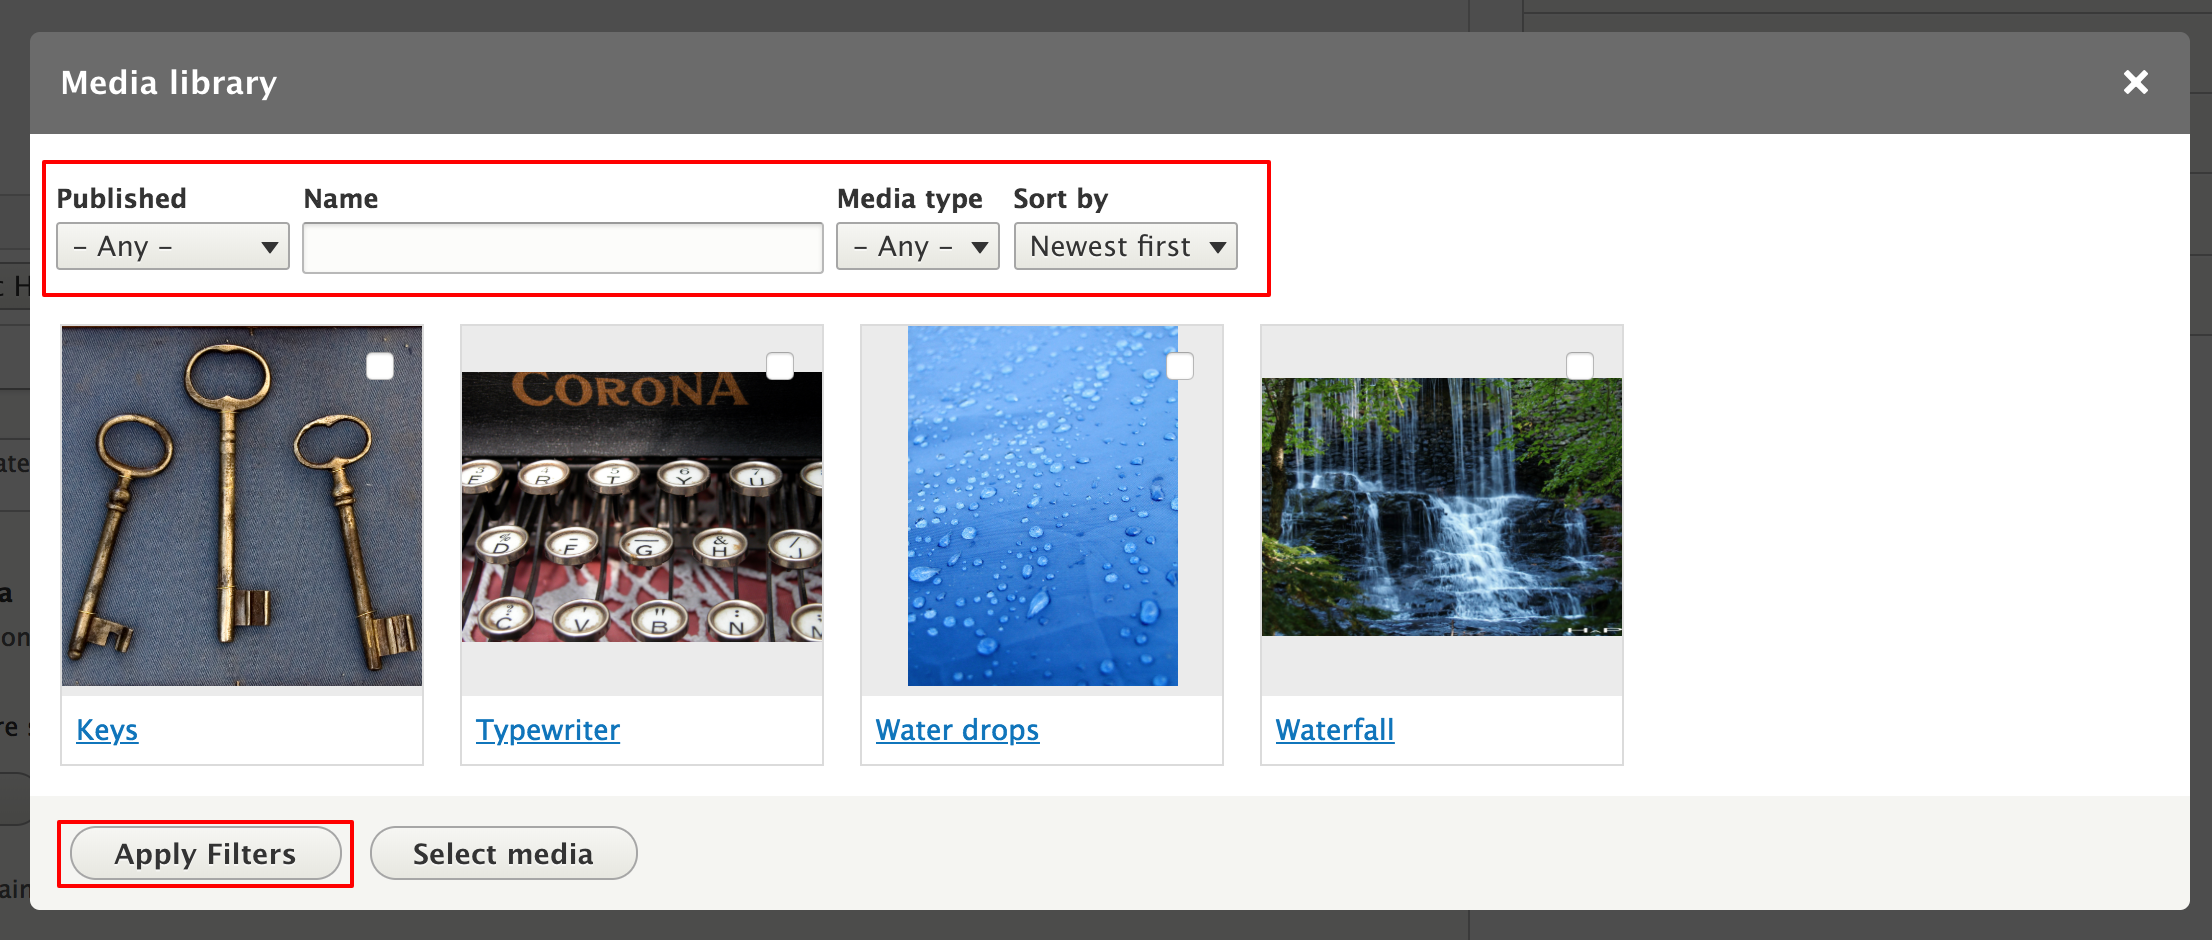 Media library 'Apply filters' button